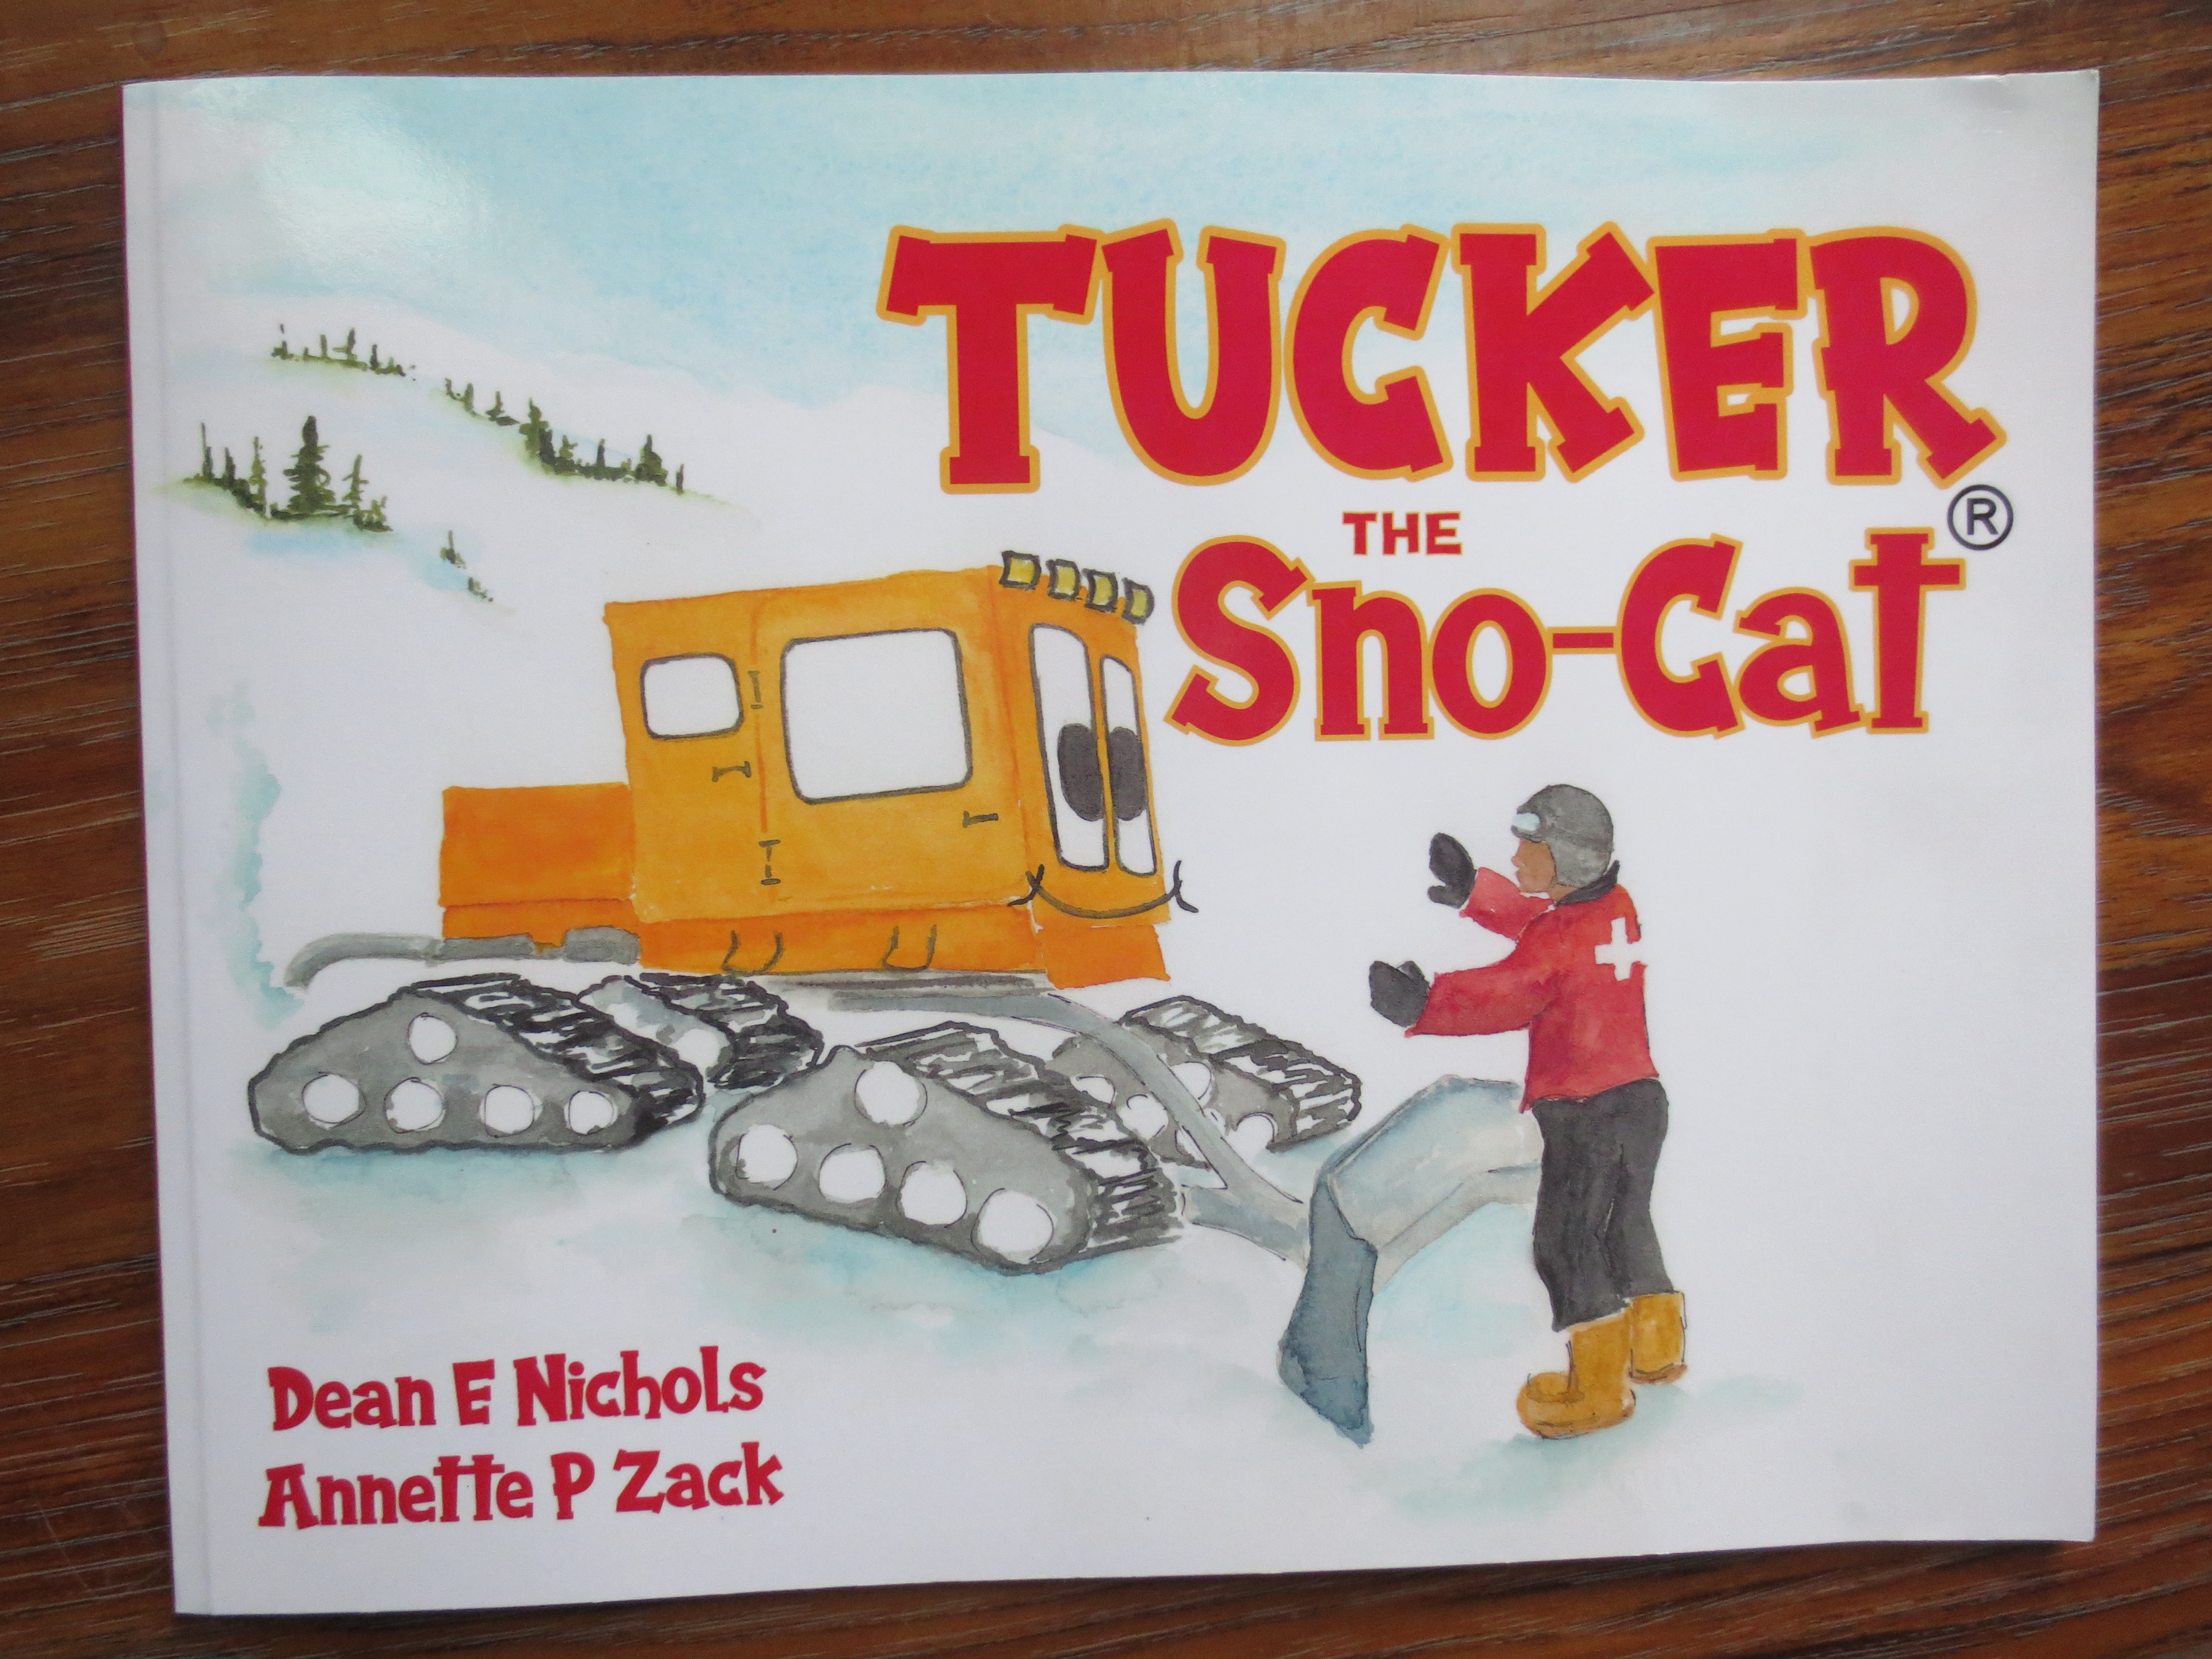 Child's book about a snowplow that rescues 2 children